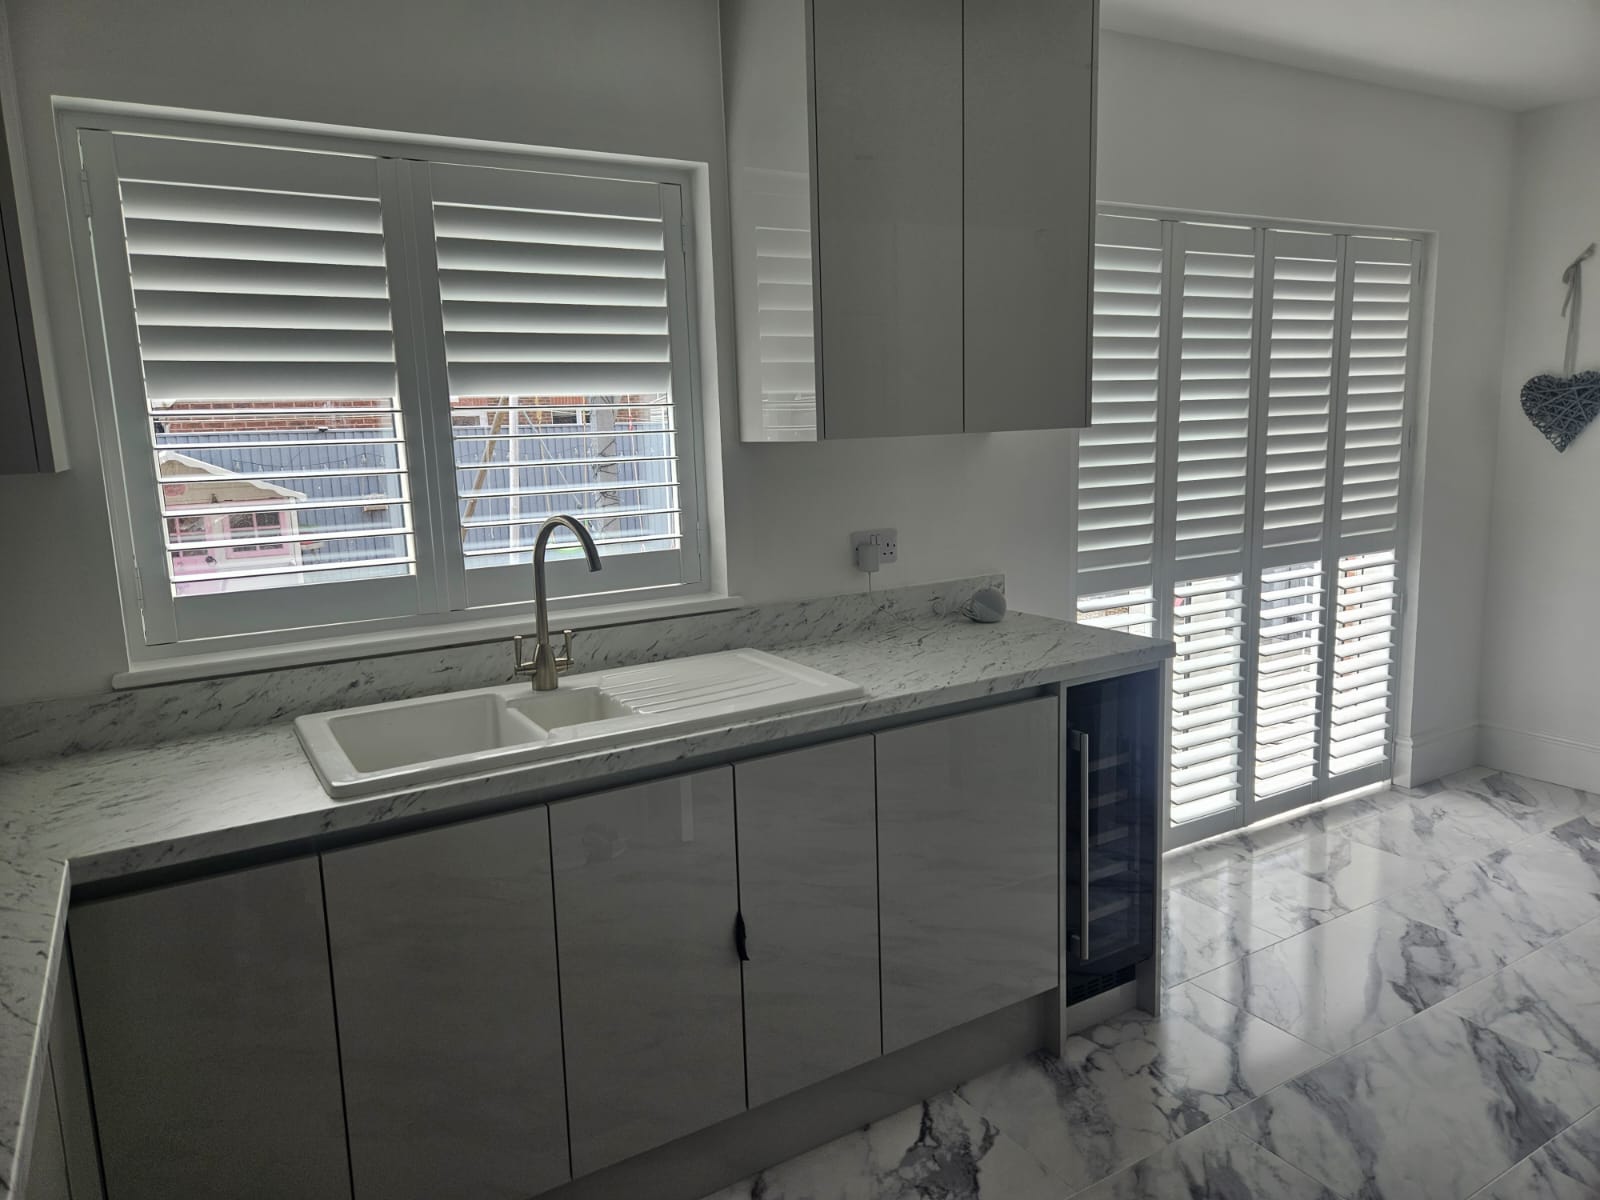 Image of plantation shutters in a customer's kitchen